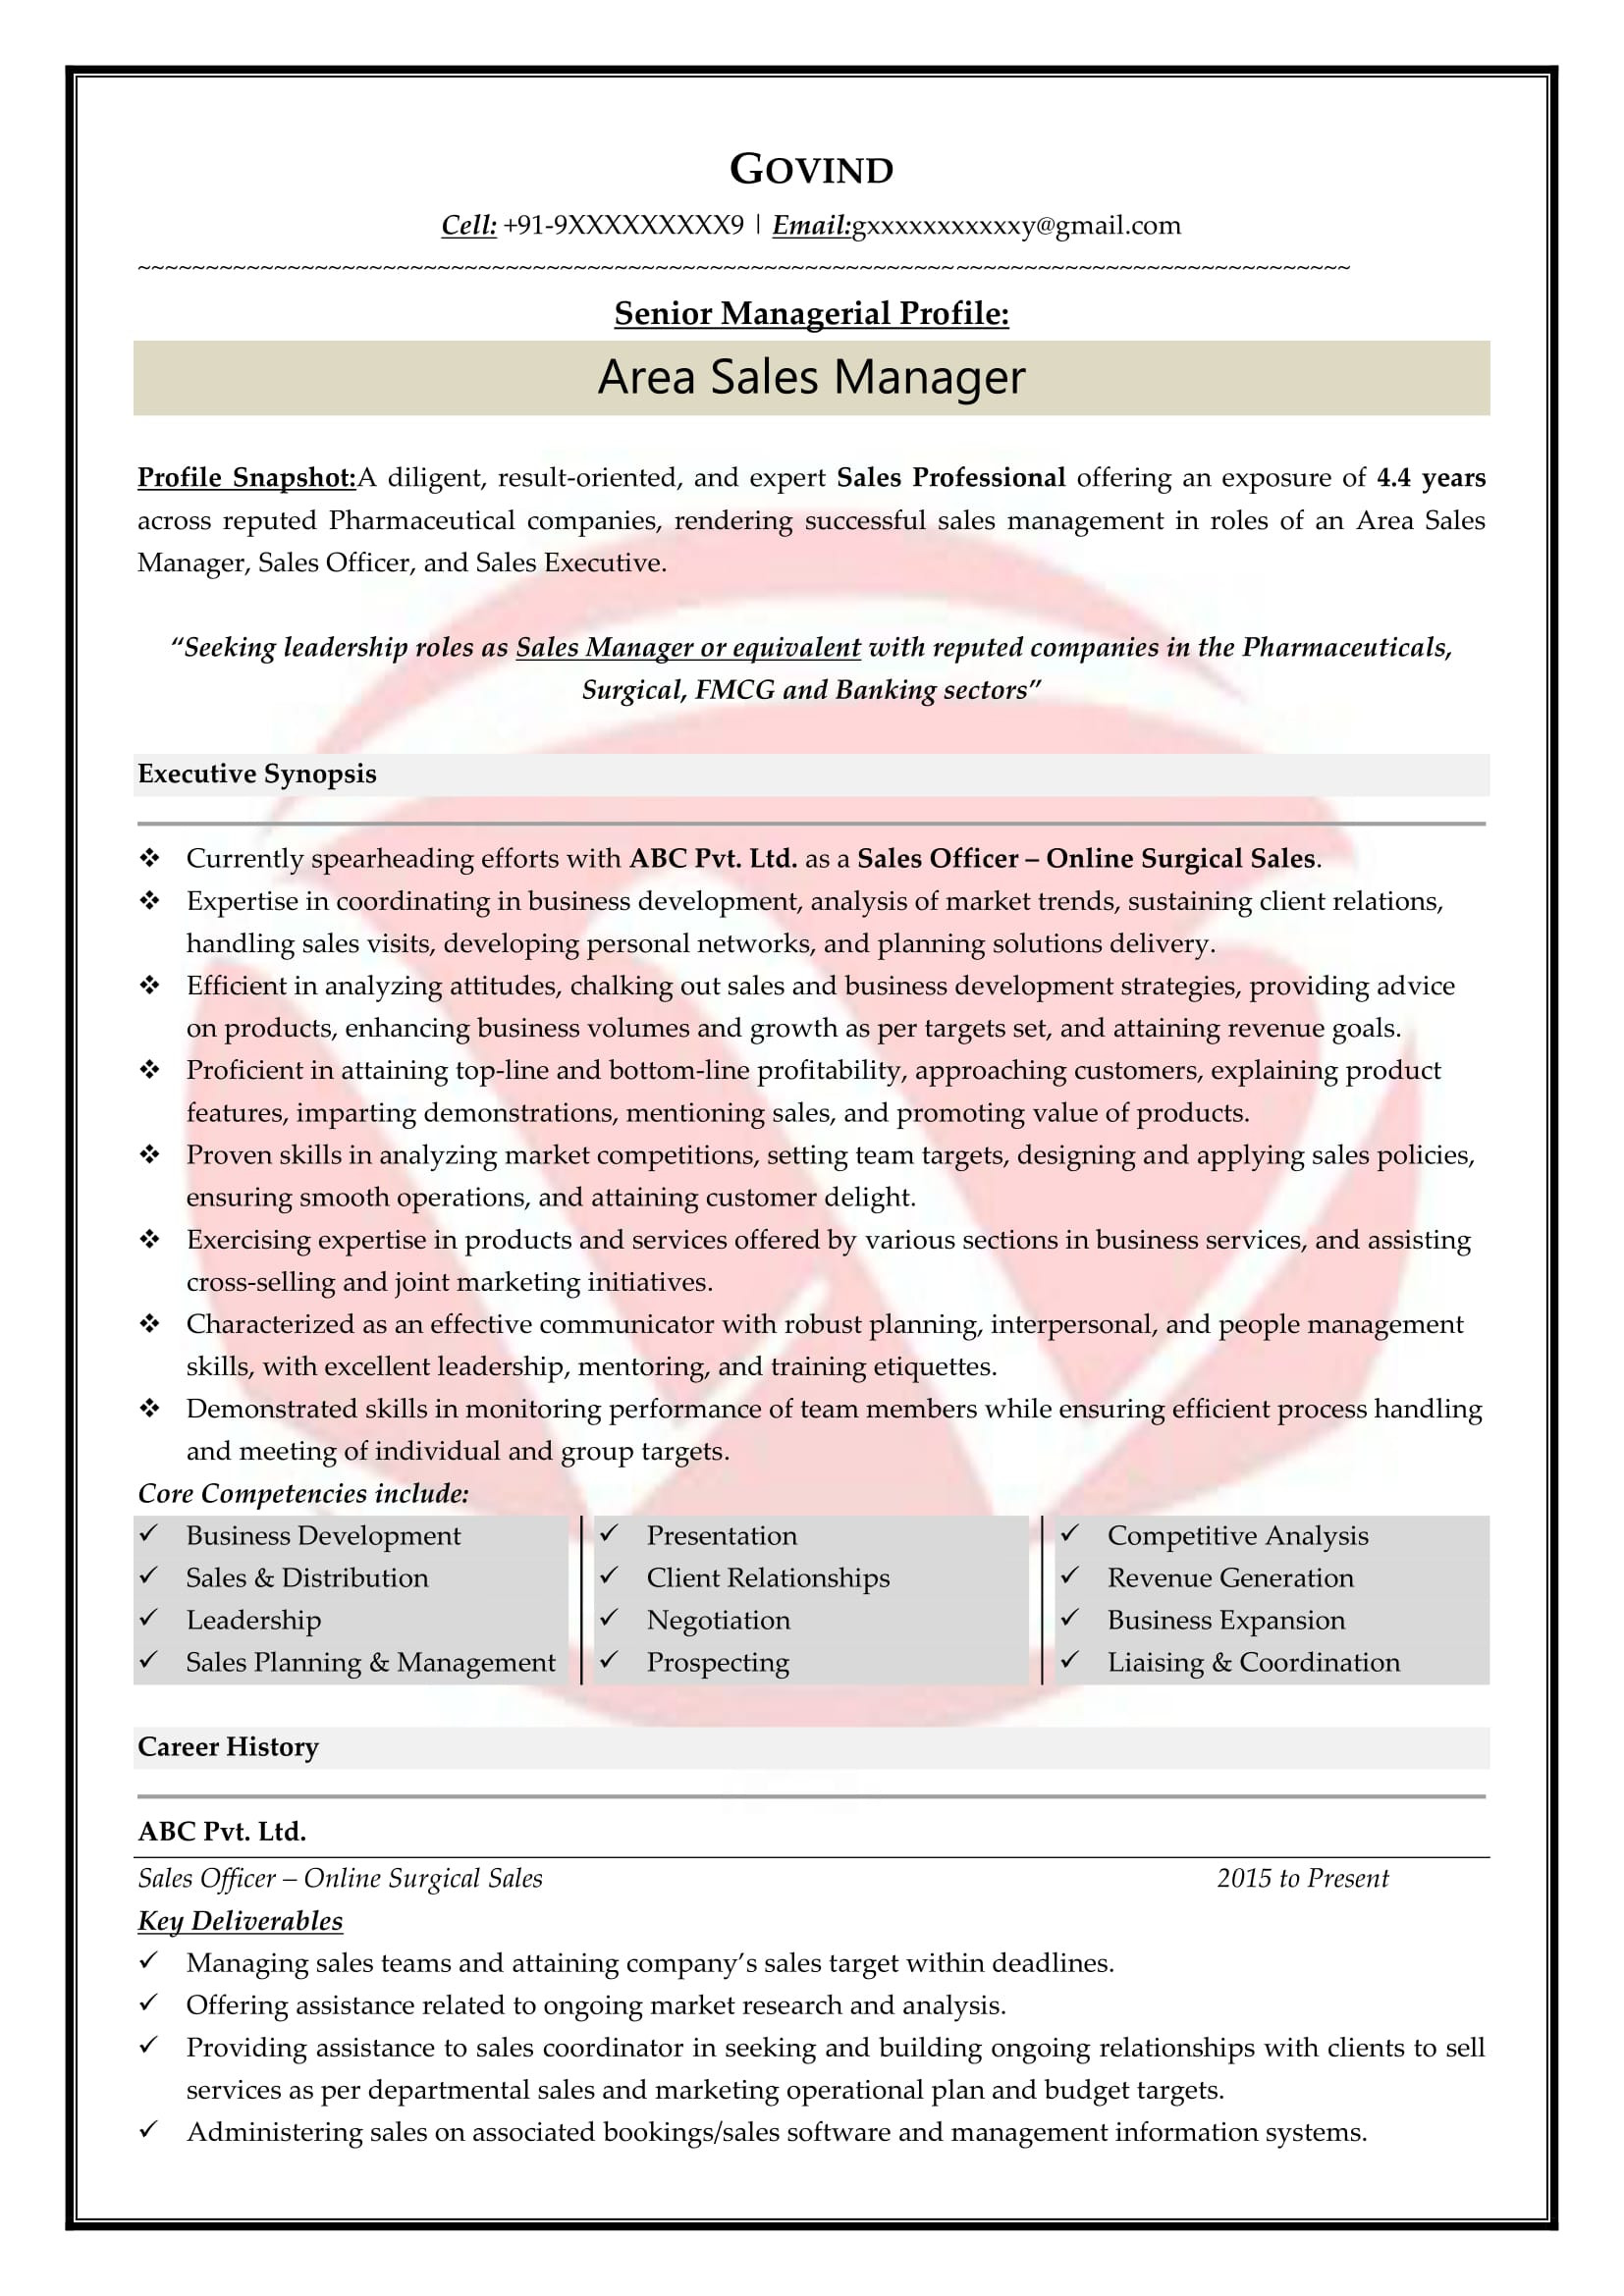 Sales and Marketing Resume Sample Download Sales Sample Resumes, Download Resume format Templates!